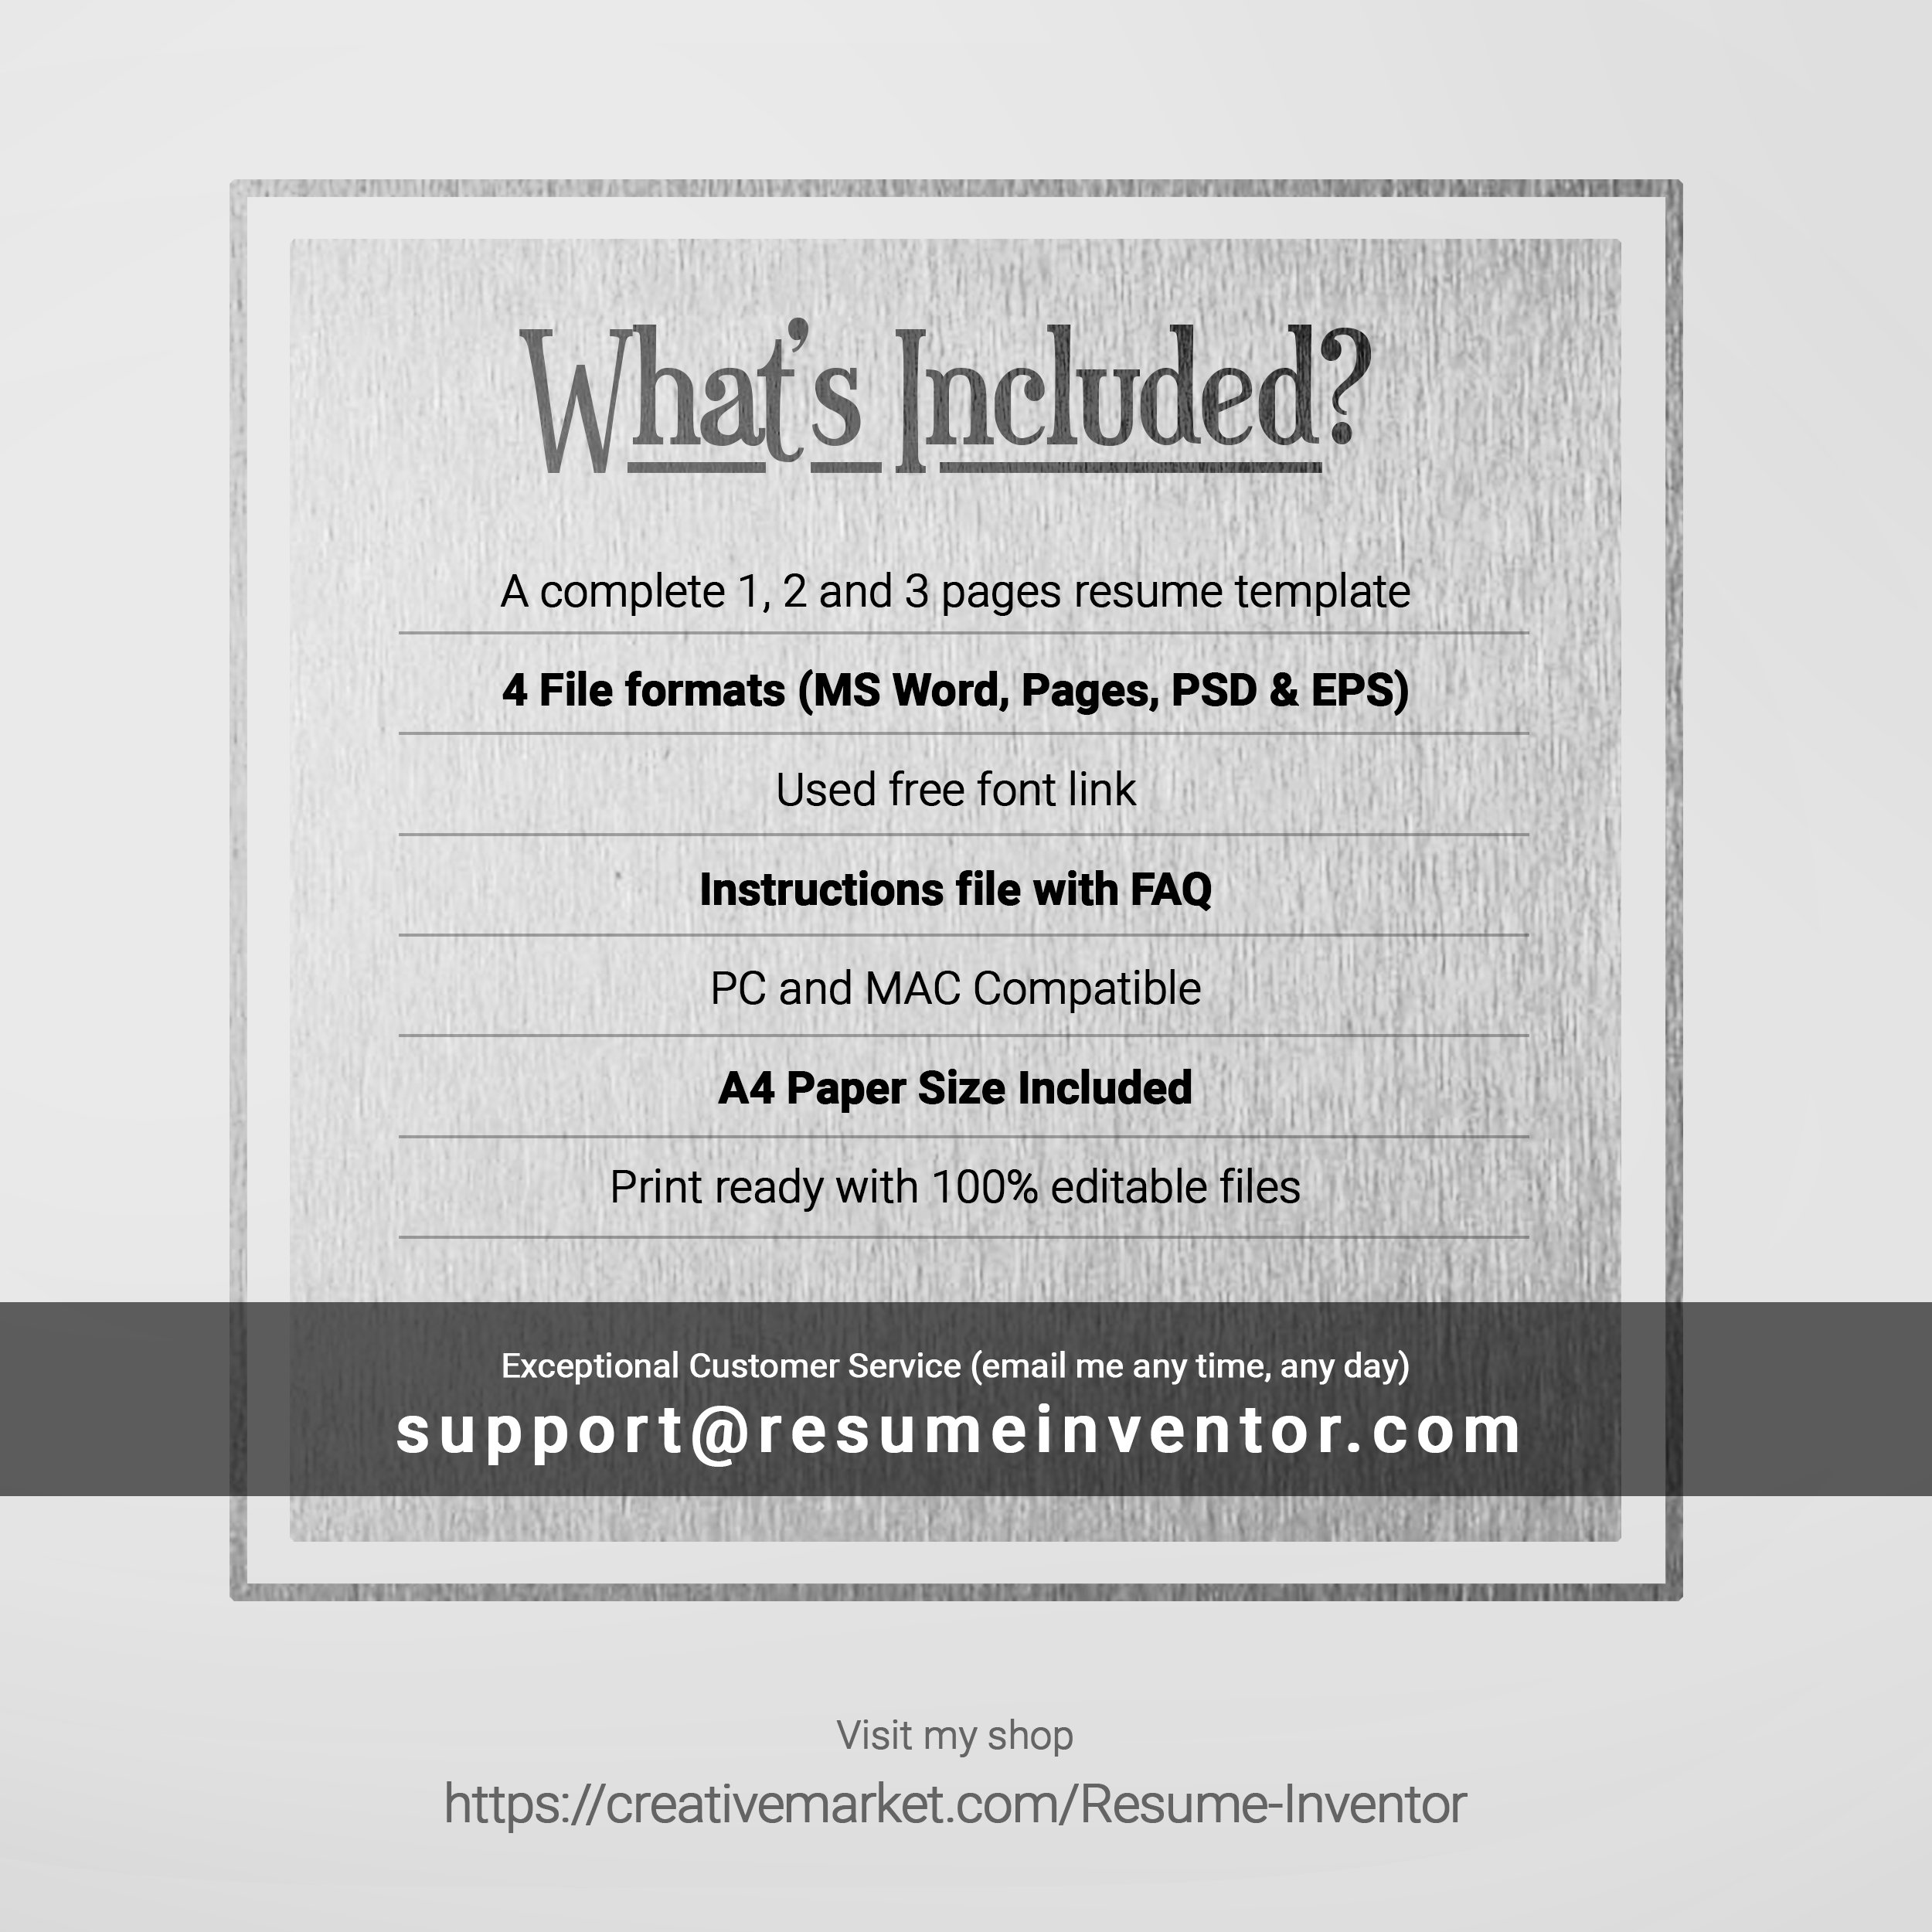 06 free resume template ms word file formats template includes 426